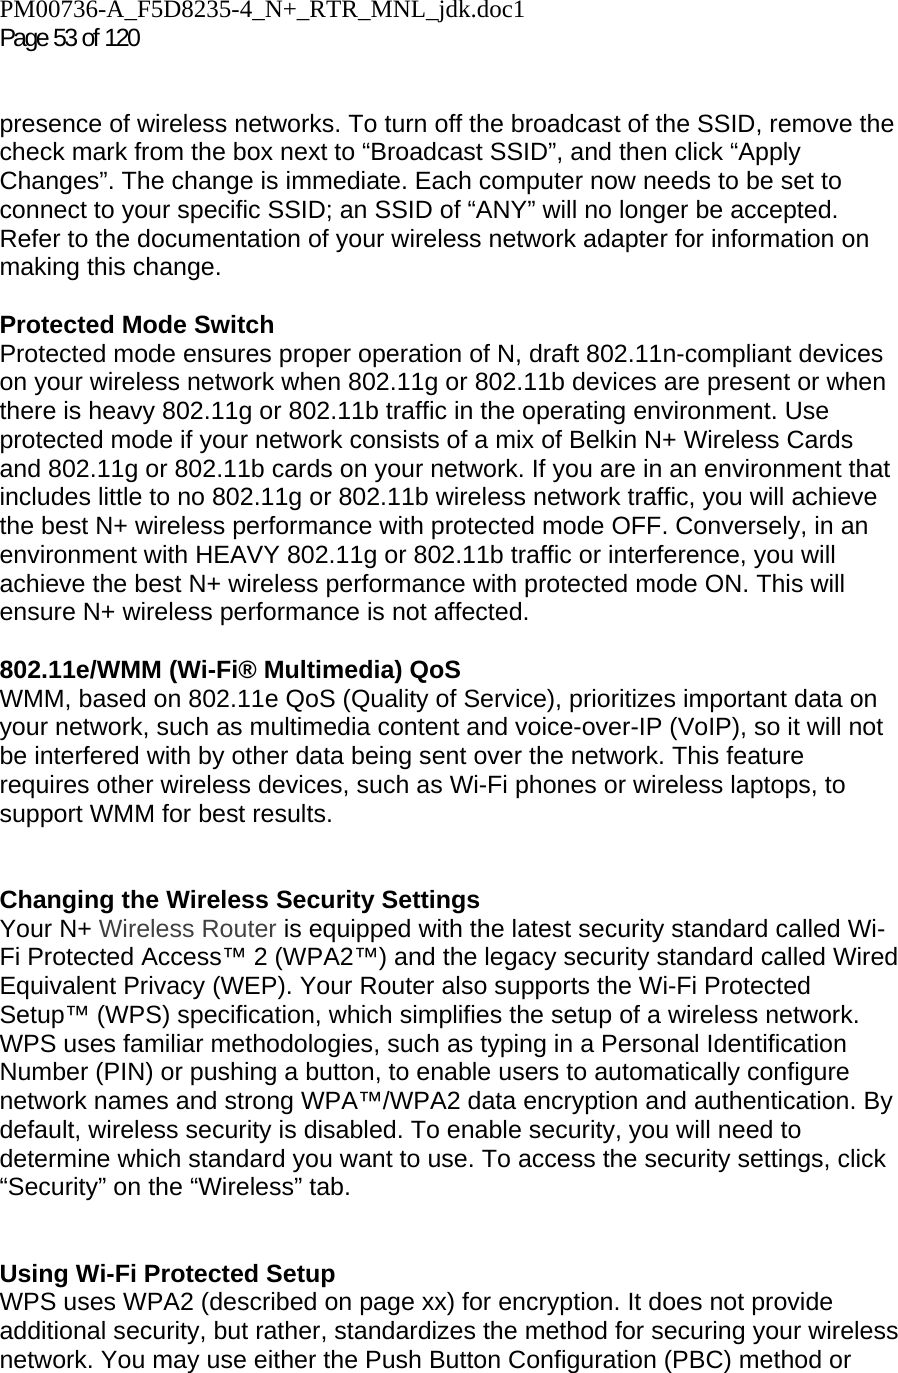 PM00736-A_F5D8235-4_N+_RTR_MNL_jdk.doc1  Page 53 of 120    presence of wireless networks. To turn off the broadcast of the SSID, remove the check mark from the box next to “Broadcast SSID”, and then click “Apply Changes”. The change is immediate. Each computer now needs to be set to connect to your specific SSID; an SSID of “ANY” will no longer be accepted. Refer to the documentation of your wireless network adapter for information on making this change.  Protected Mode Switch Protected mode ensures proper operation of N, draft 802.11n-compliant devices on your wireless network when 802.11g or 802.11b devices are present or when there is heavy 802.11g or 802.11b traffic in the operating environment. Use protected mode if your network consists of a mix of Belkin N+ Wireless Cards and 802.11g or 802.11b cards on your network. If you are in an environment that includes little to no 802.11g or 802.11b wireless network traffic, you will achieve the best N+ wireless performance with protected mode OFF. Conversely, in an environment with HEAVY 802.11g or 802.11b traffic or interference, you will achieve the best N+ wireless performance with protected mode ON. This will ensure N+ wireless performance is not affected.   802.11e/WMM (Wi-Fi® Multimedia) QoS WMM, based on 802.11e QoS (Quality of Service), prioritizes important data on your network, such as multimedia content and voice-over-IP (VoIP), so it will not be interfered with by other data being sent over the network. This feature requires other wireless devices, such as Wi-Fi phones or wireless laptops, to support WMM for best results.    Changing the Wireless Security Settings Your N+ Wireless Router is equipped with the latest security standard called Wi-Fi Protected Access™ 2 (WPA2™) and the legacy security standard called Wired Equivalent Privacy (WEP). Your Router also supports the Wi-Fi Protected Setup™ (WPS) specification, which simplifies the setup of a wireless network. WPS uses familiar methodologies, such as typing in a Personal Identification Number (PIN) or pushing a button, to enable users to automatically configure network names and strong WPA™/WPA2 data encryption and authentication. By default, wireless security is disabled. To enable security, you will need to determine which standard you want to use. To access the security settings, click “Security” on the “Wireless” tab.   Using Wi-Fi Protected Setup WPS uses WPA2 (described on page xx) for encryption. It does not provide additional security, but rather, standardizes the method for securing your wireless network. You may use either the Push Button Configuration (PBC) method or 